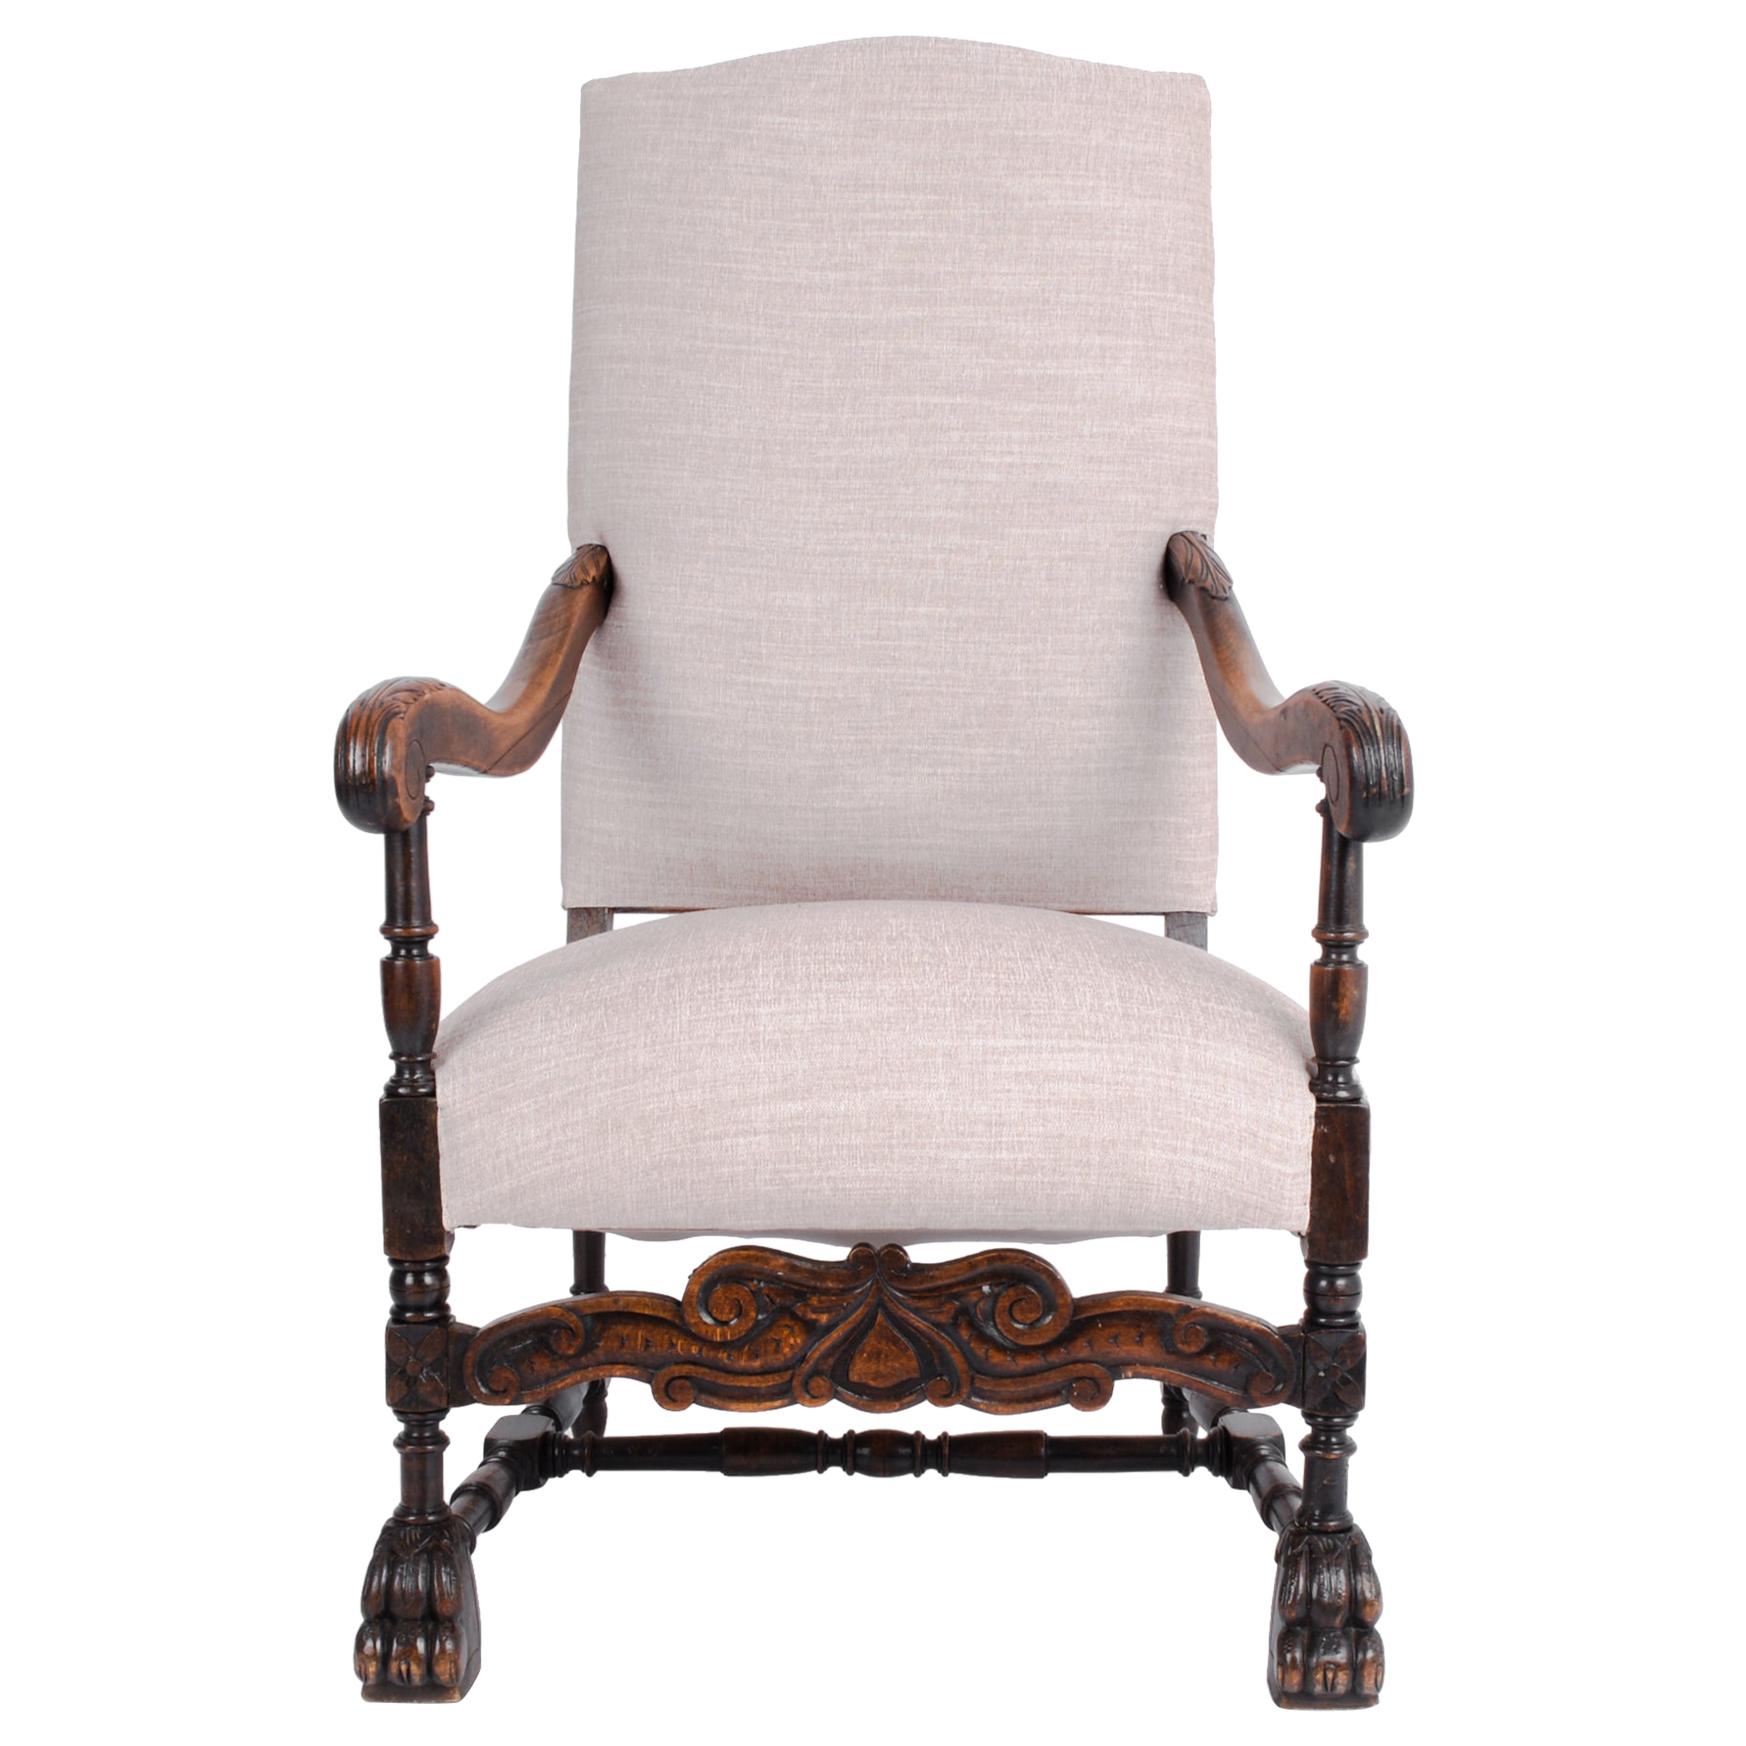 Late 19th Century French Wooden Armchair